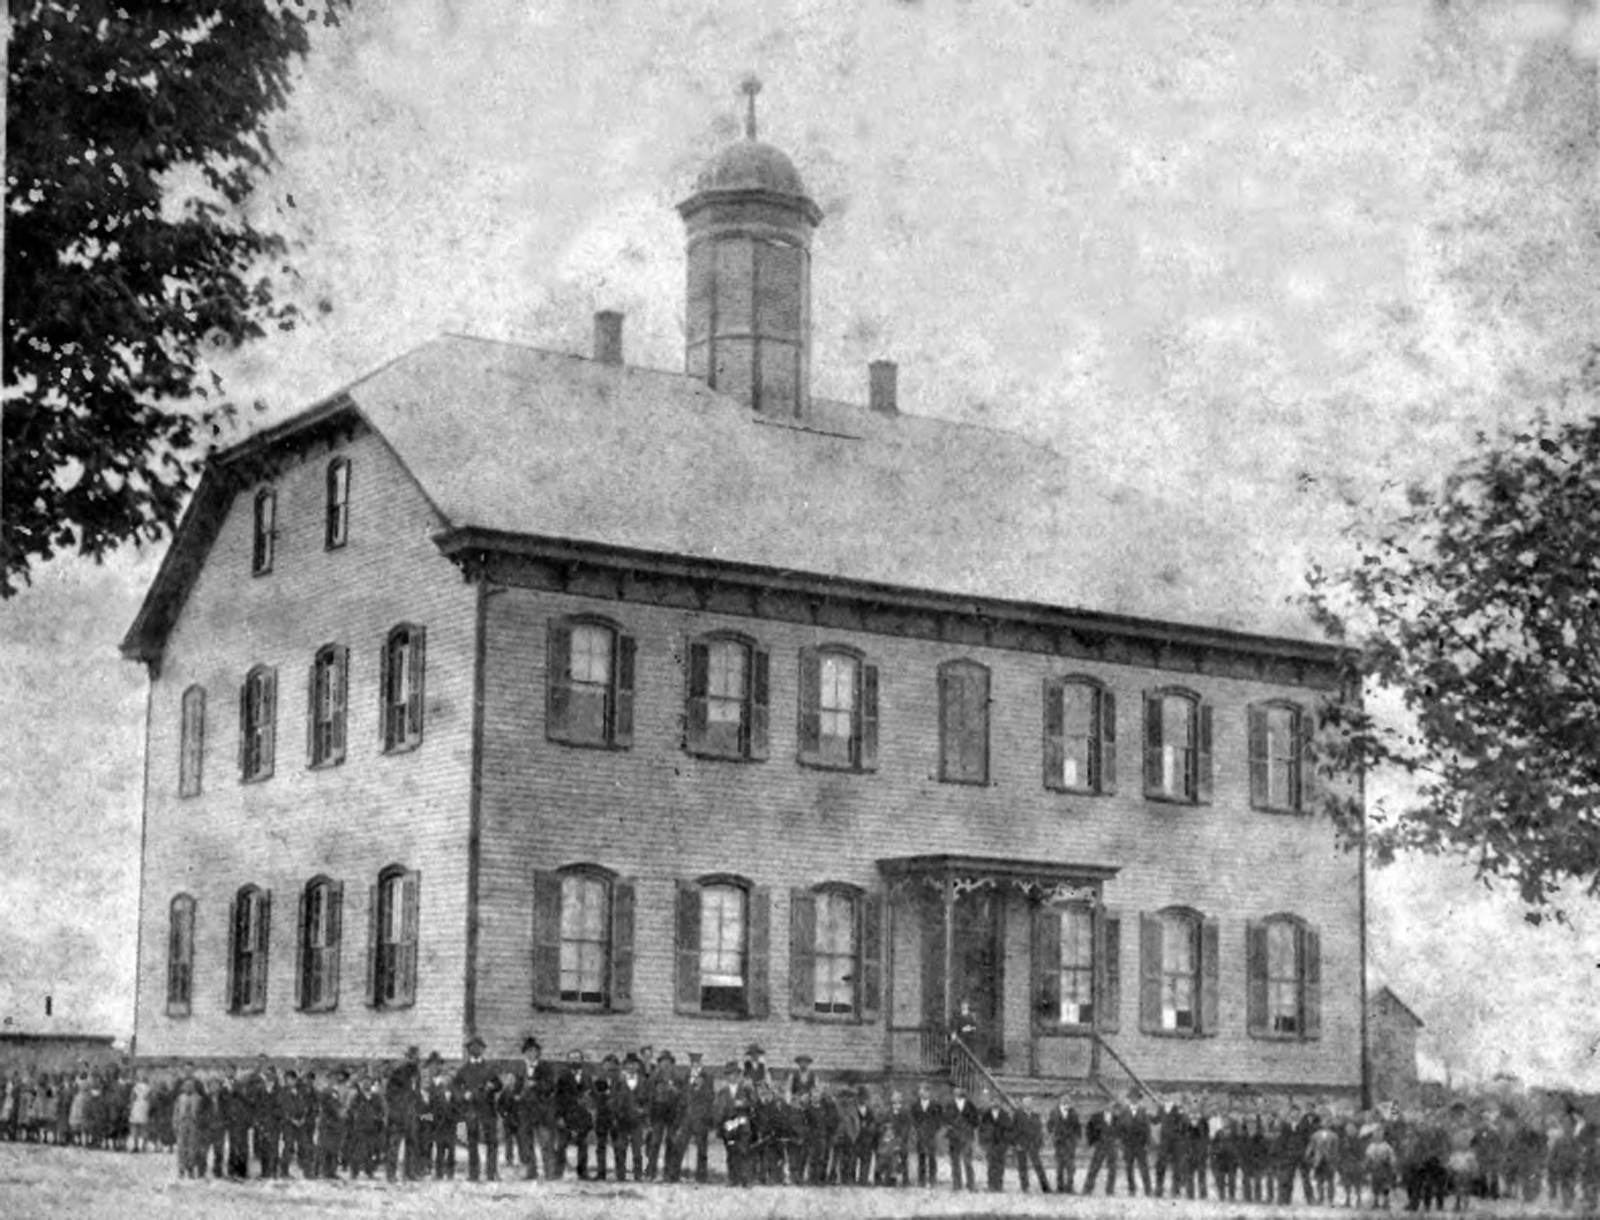 Egg Harbor City - An early view of the Pike School - Late 19th century